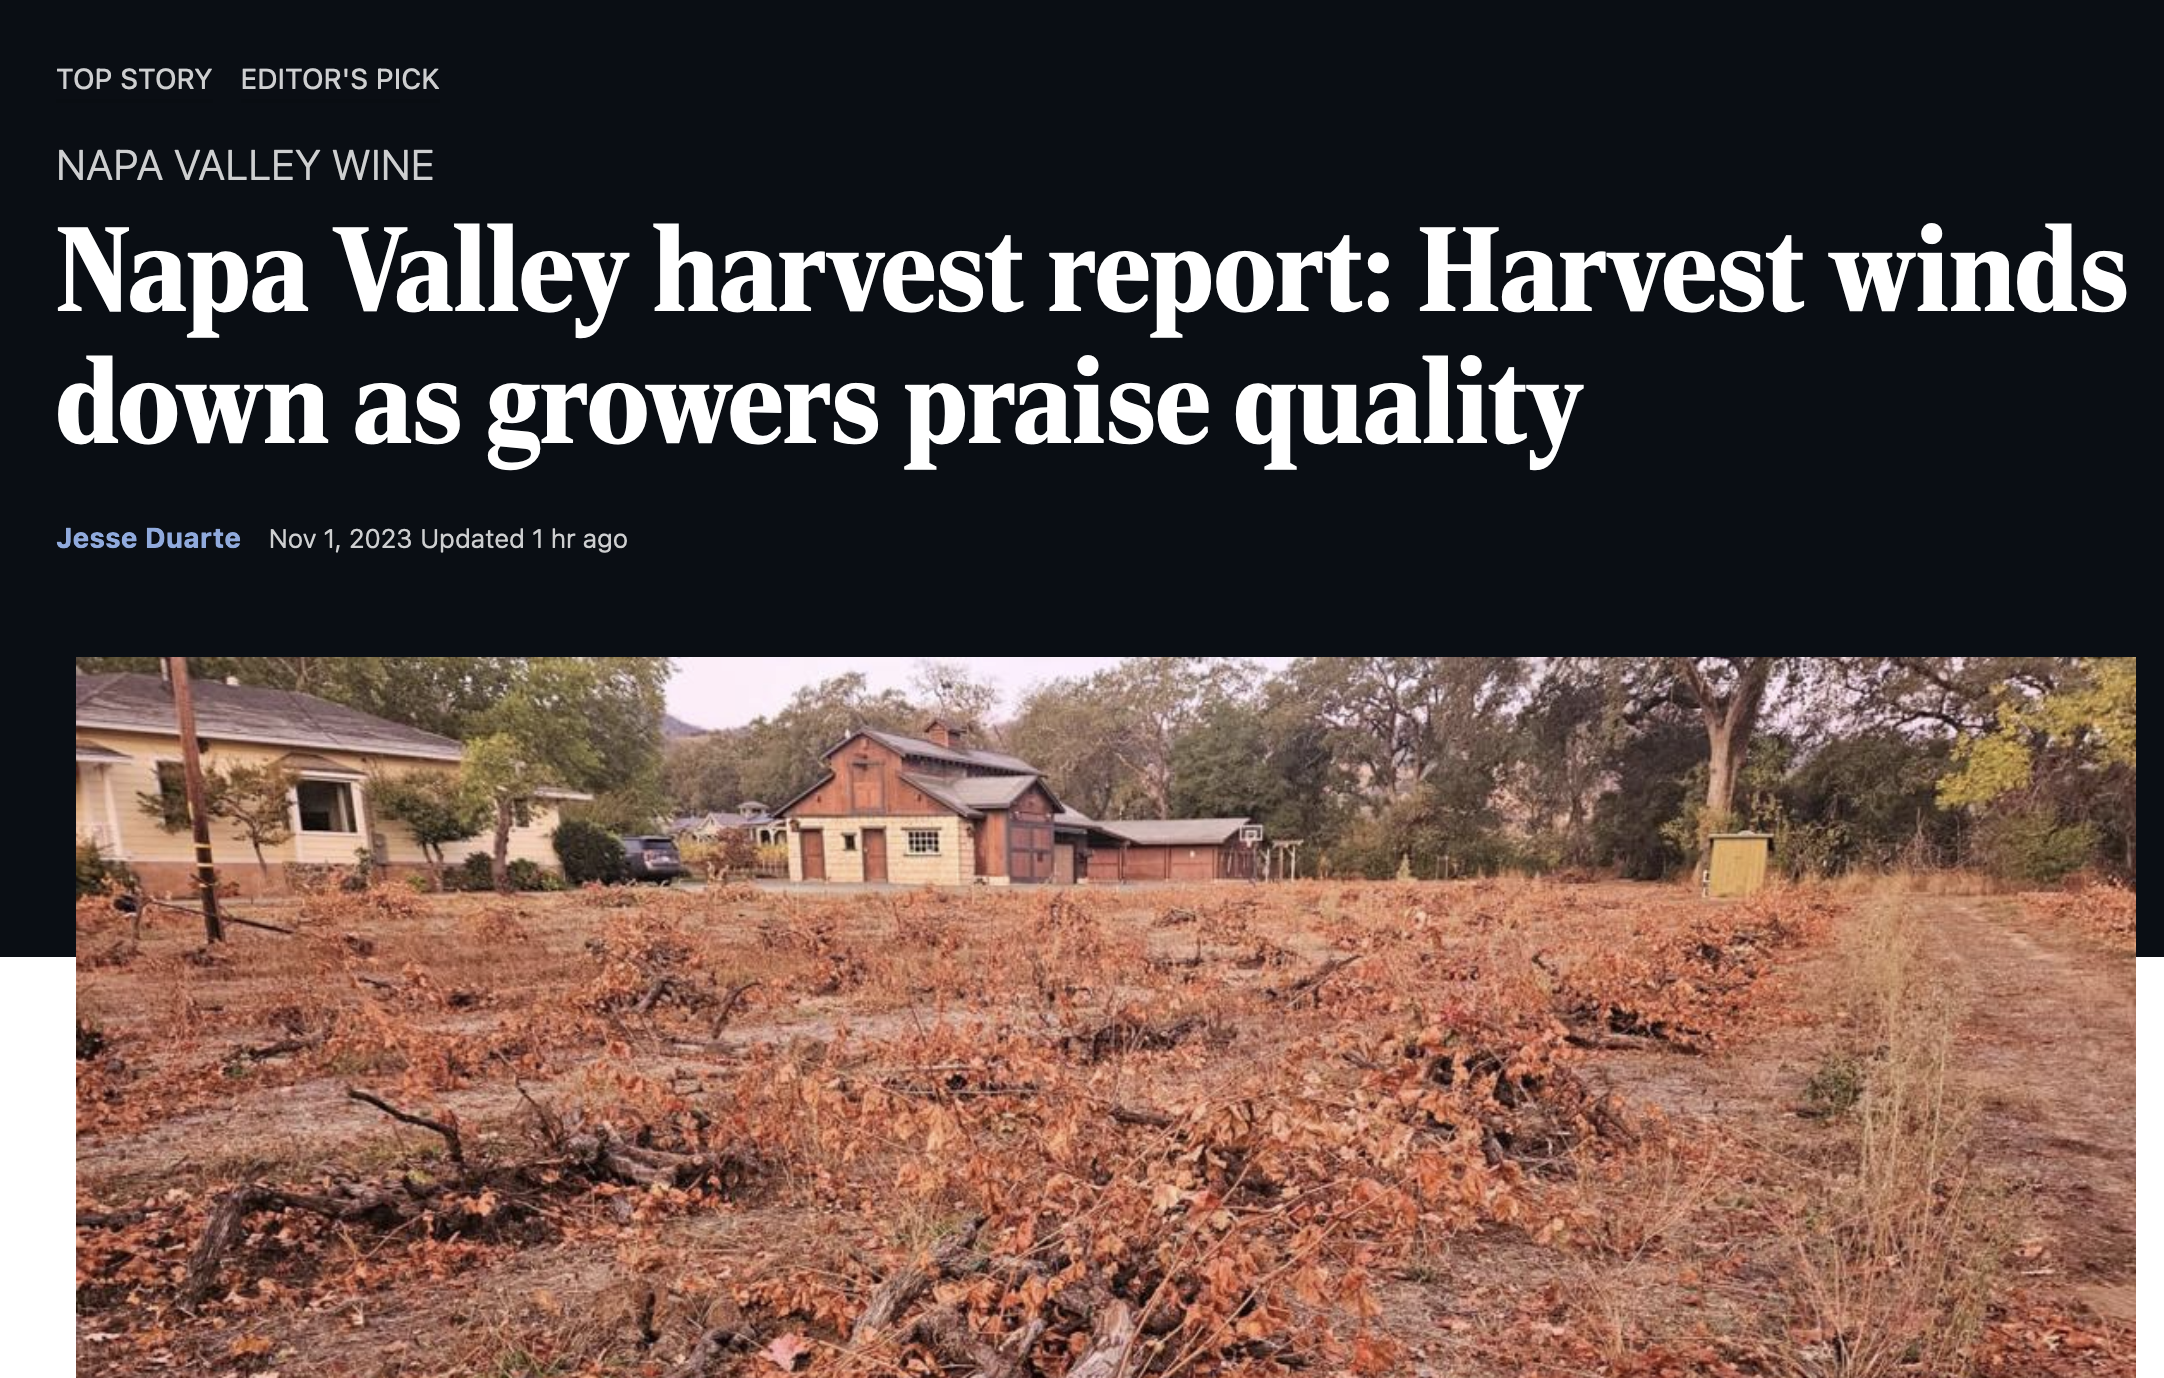 Napa Valley harvest report: Harvest winds down as growers praise quality